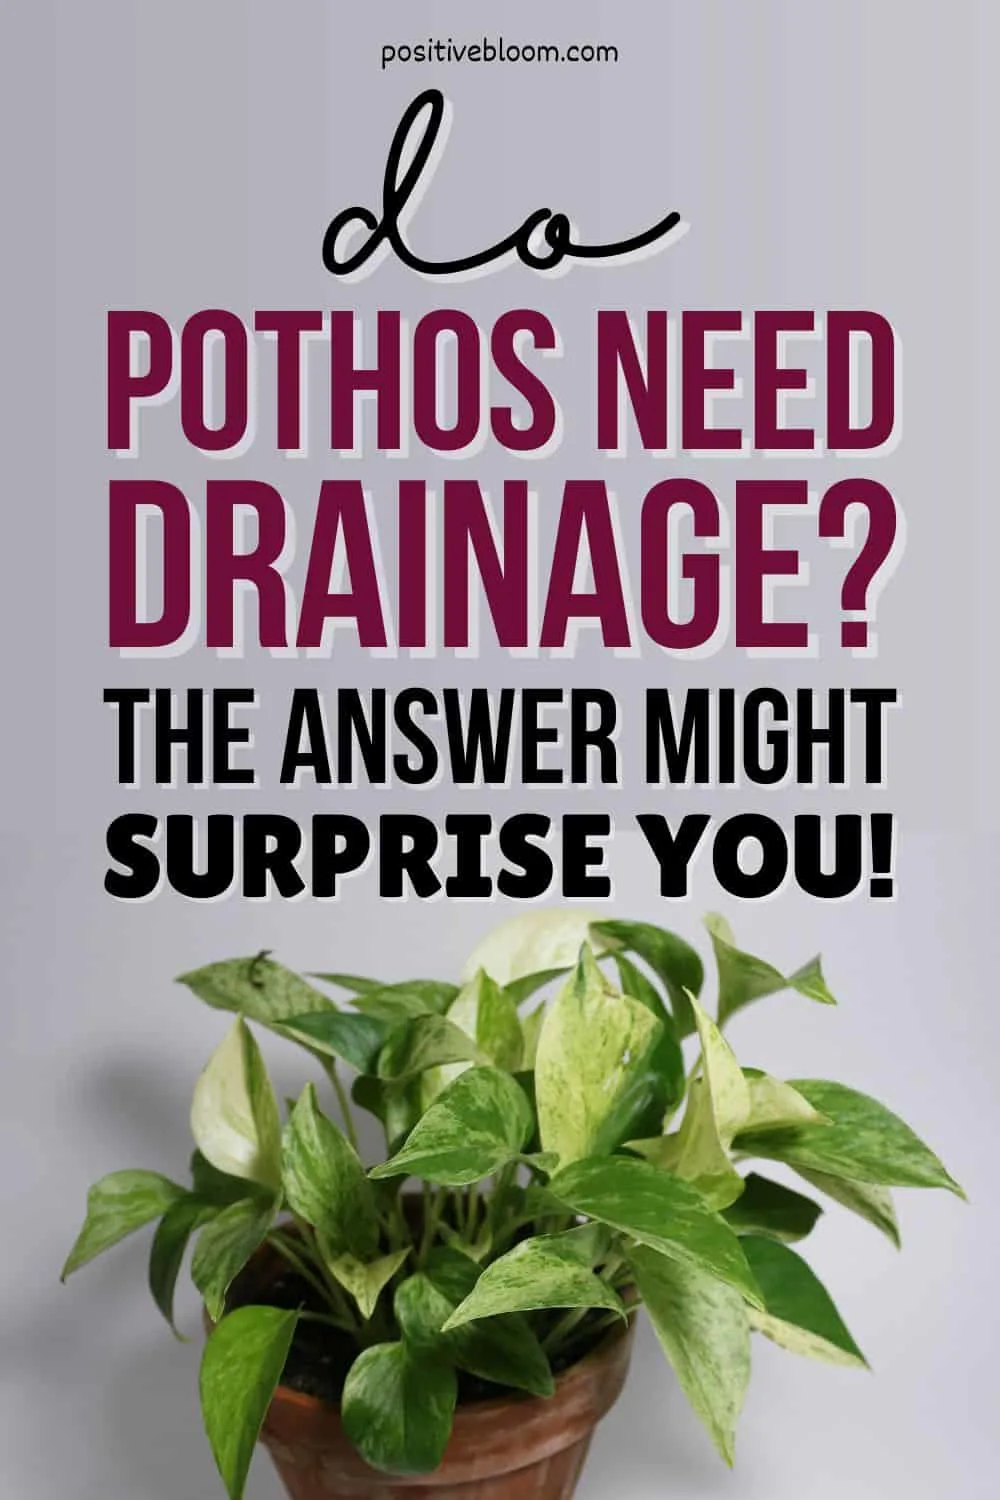 Do Pothos Need Drainage The Answer Might Surprise You! Pinterest